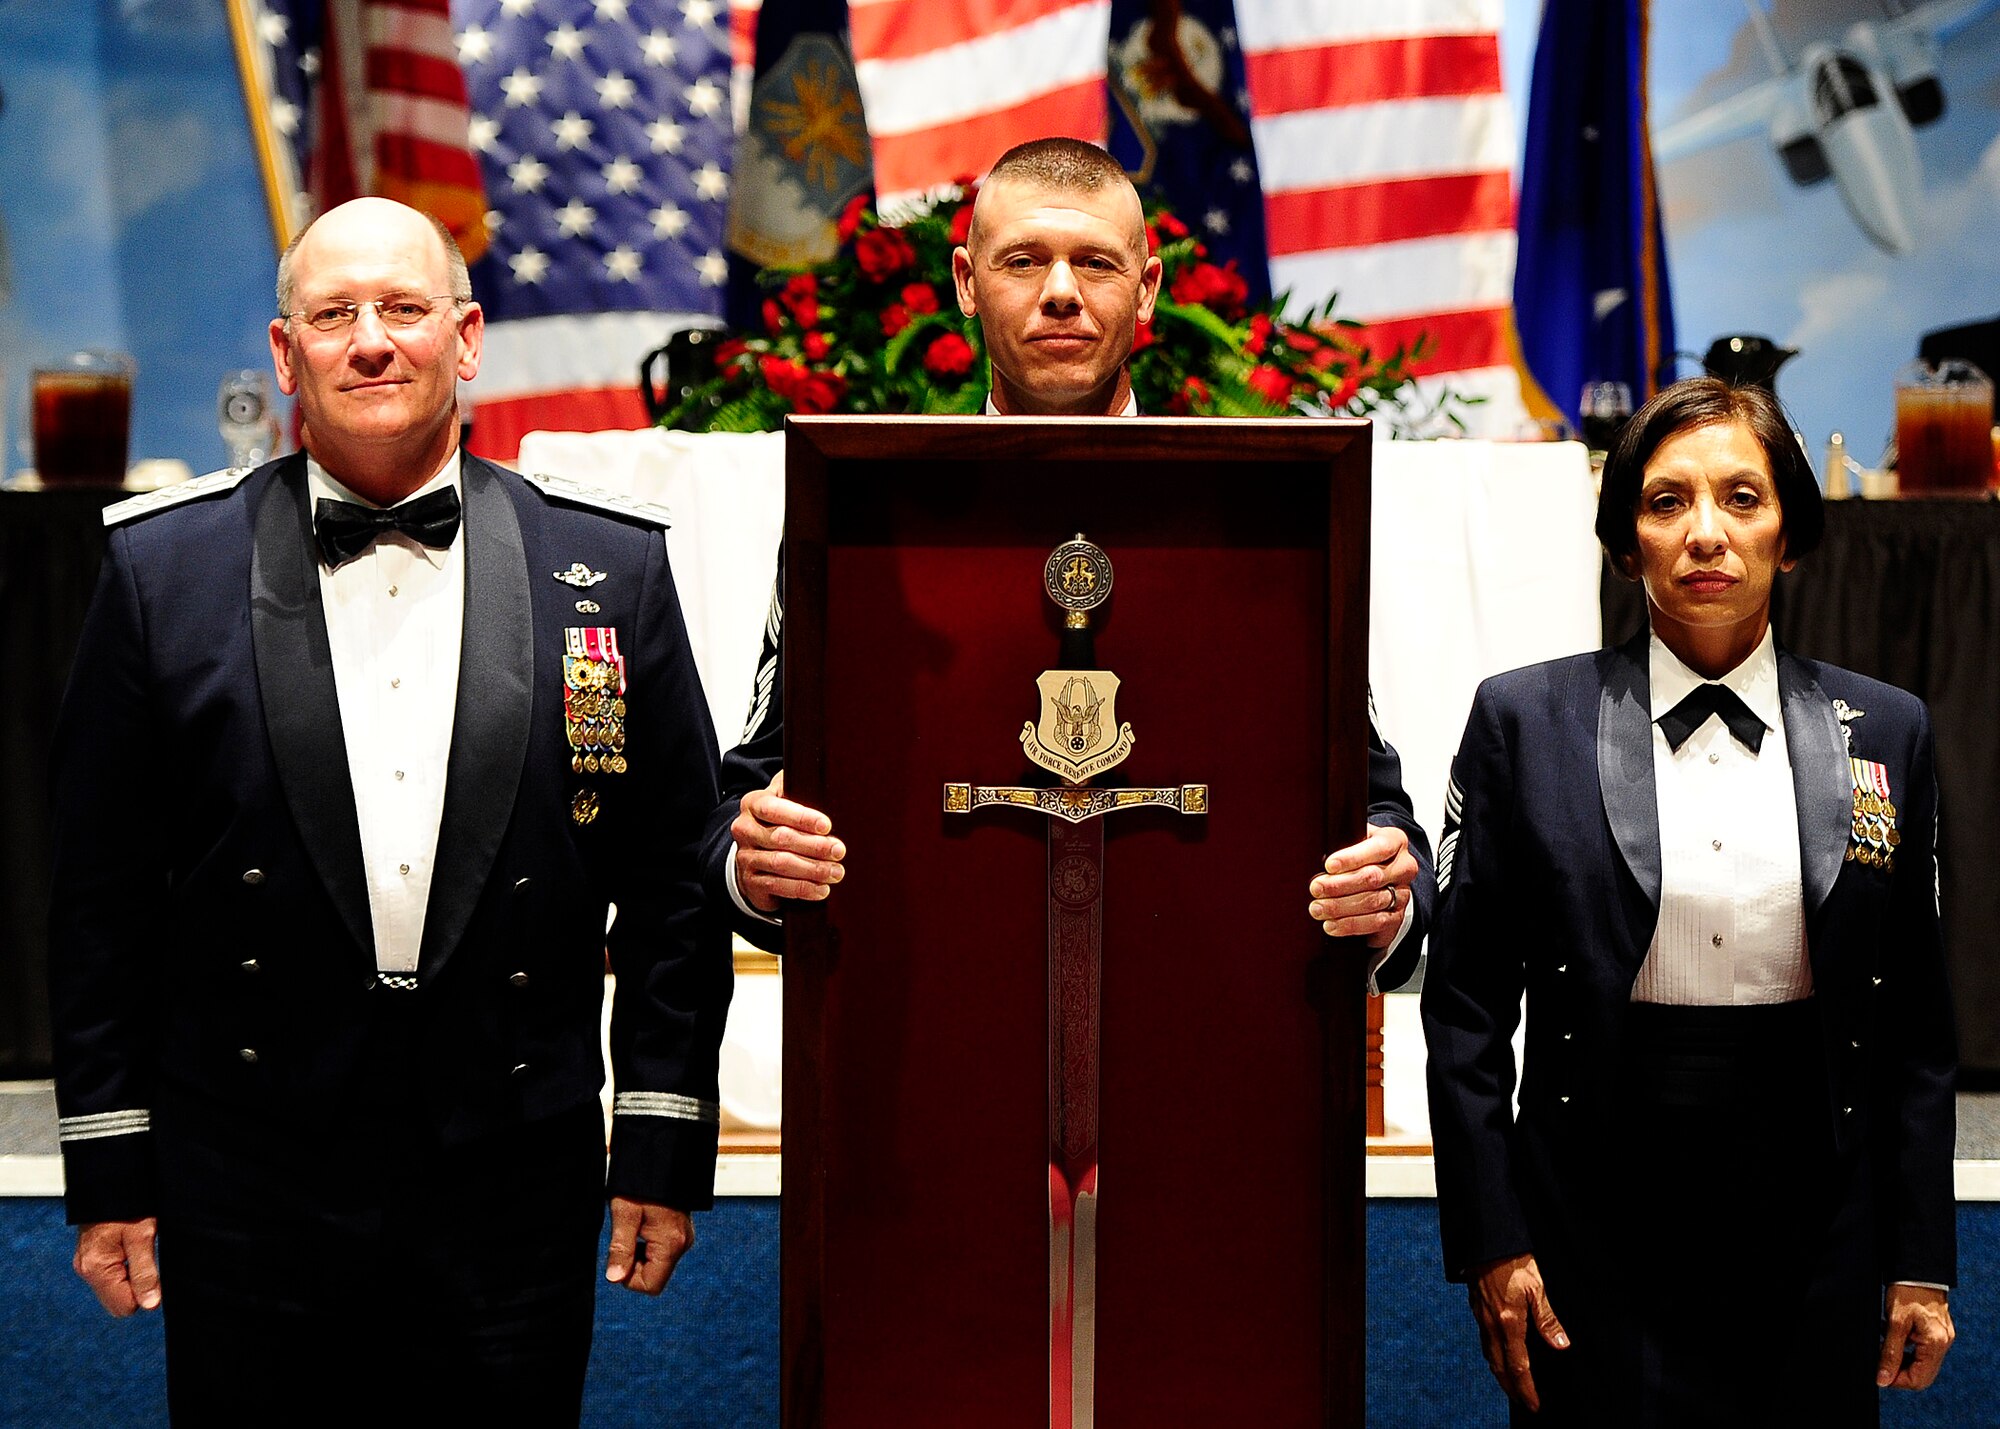 ergeant at Arms Chief Master Sgt. Paul Tomlinson and CMSgt of the Mess Erica Kelly present the sword to former chief of Air Force Reserve Command, Lt. Gen. James F. Jackson, during the Order of the Sword ceremony at the Museum of Aviation in Warner Robins, Ga., July 13, 2016. The Order of the Sword is an honor awarded by the NCOs of a command to recognize individuals they hold in high esteem and for their contributions to the enlisted corps. (U.S. Air Force photo by Tech. Sgt. Stephen D. Schester)